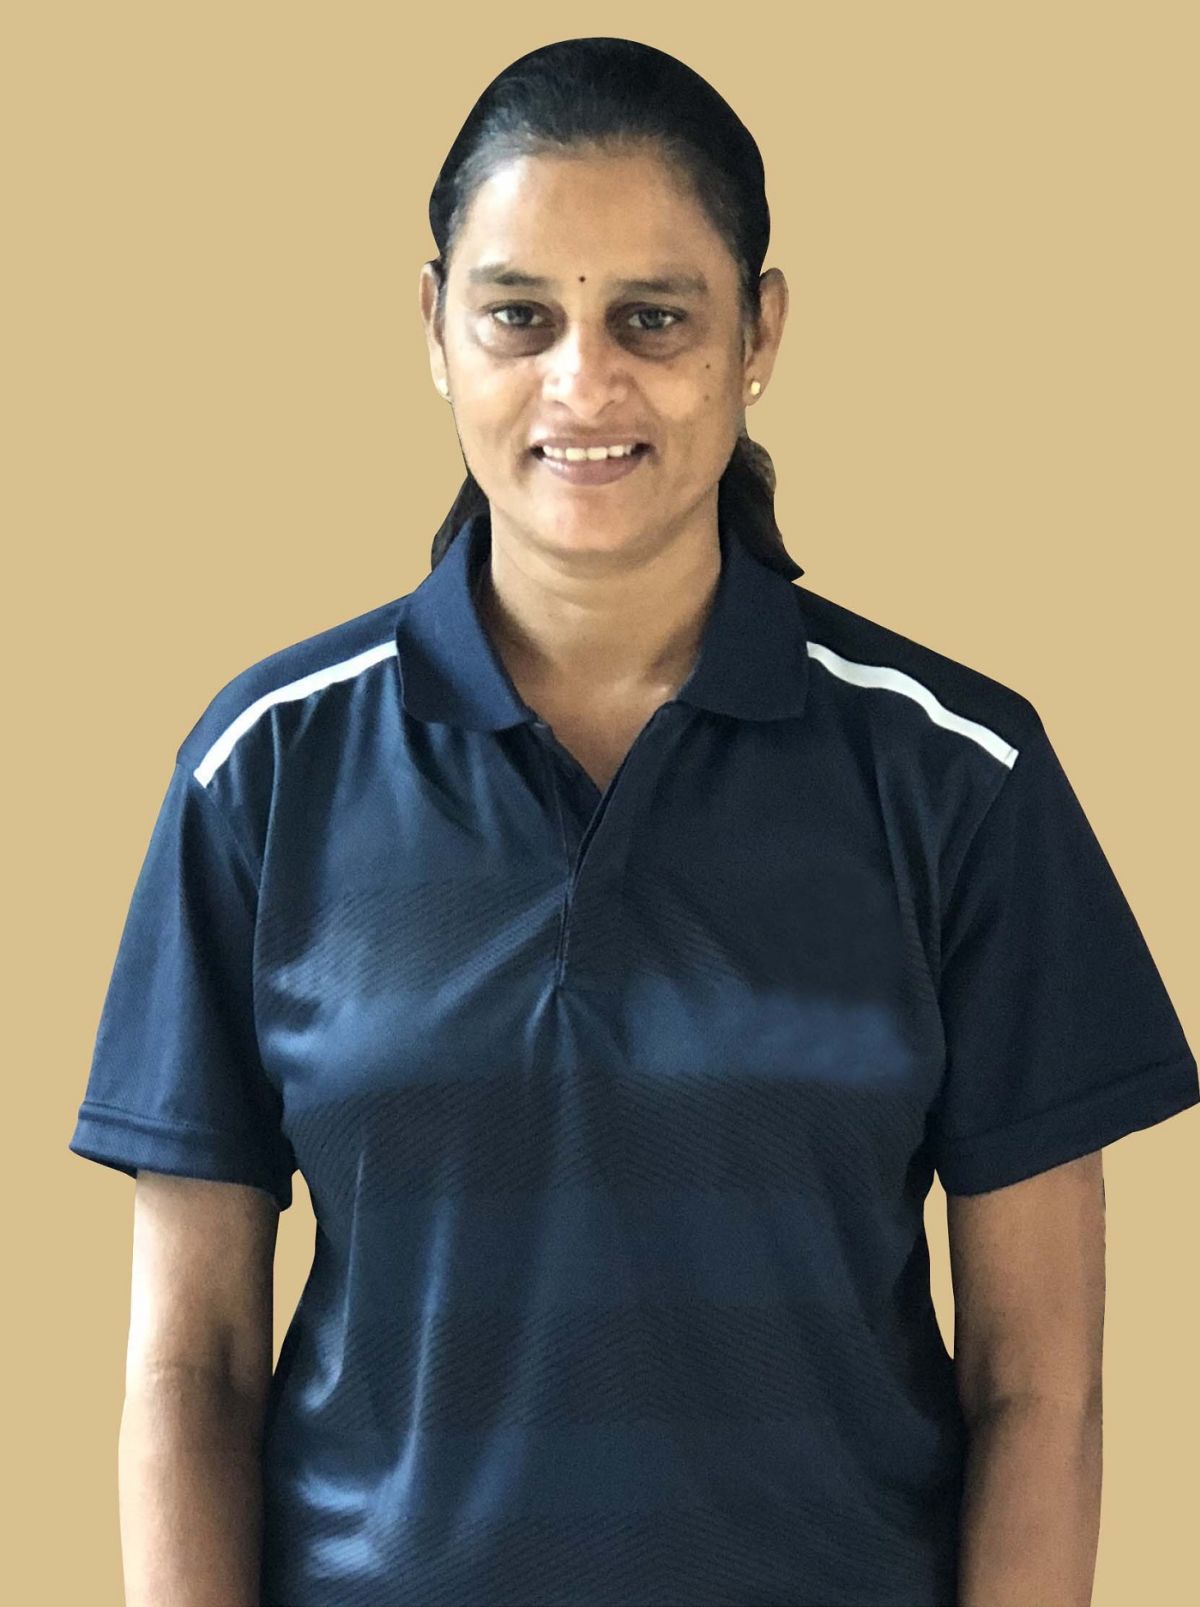 GS Lakshmi became the first female match referee in the ICC